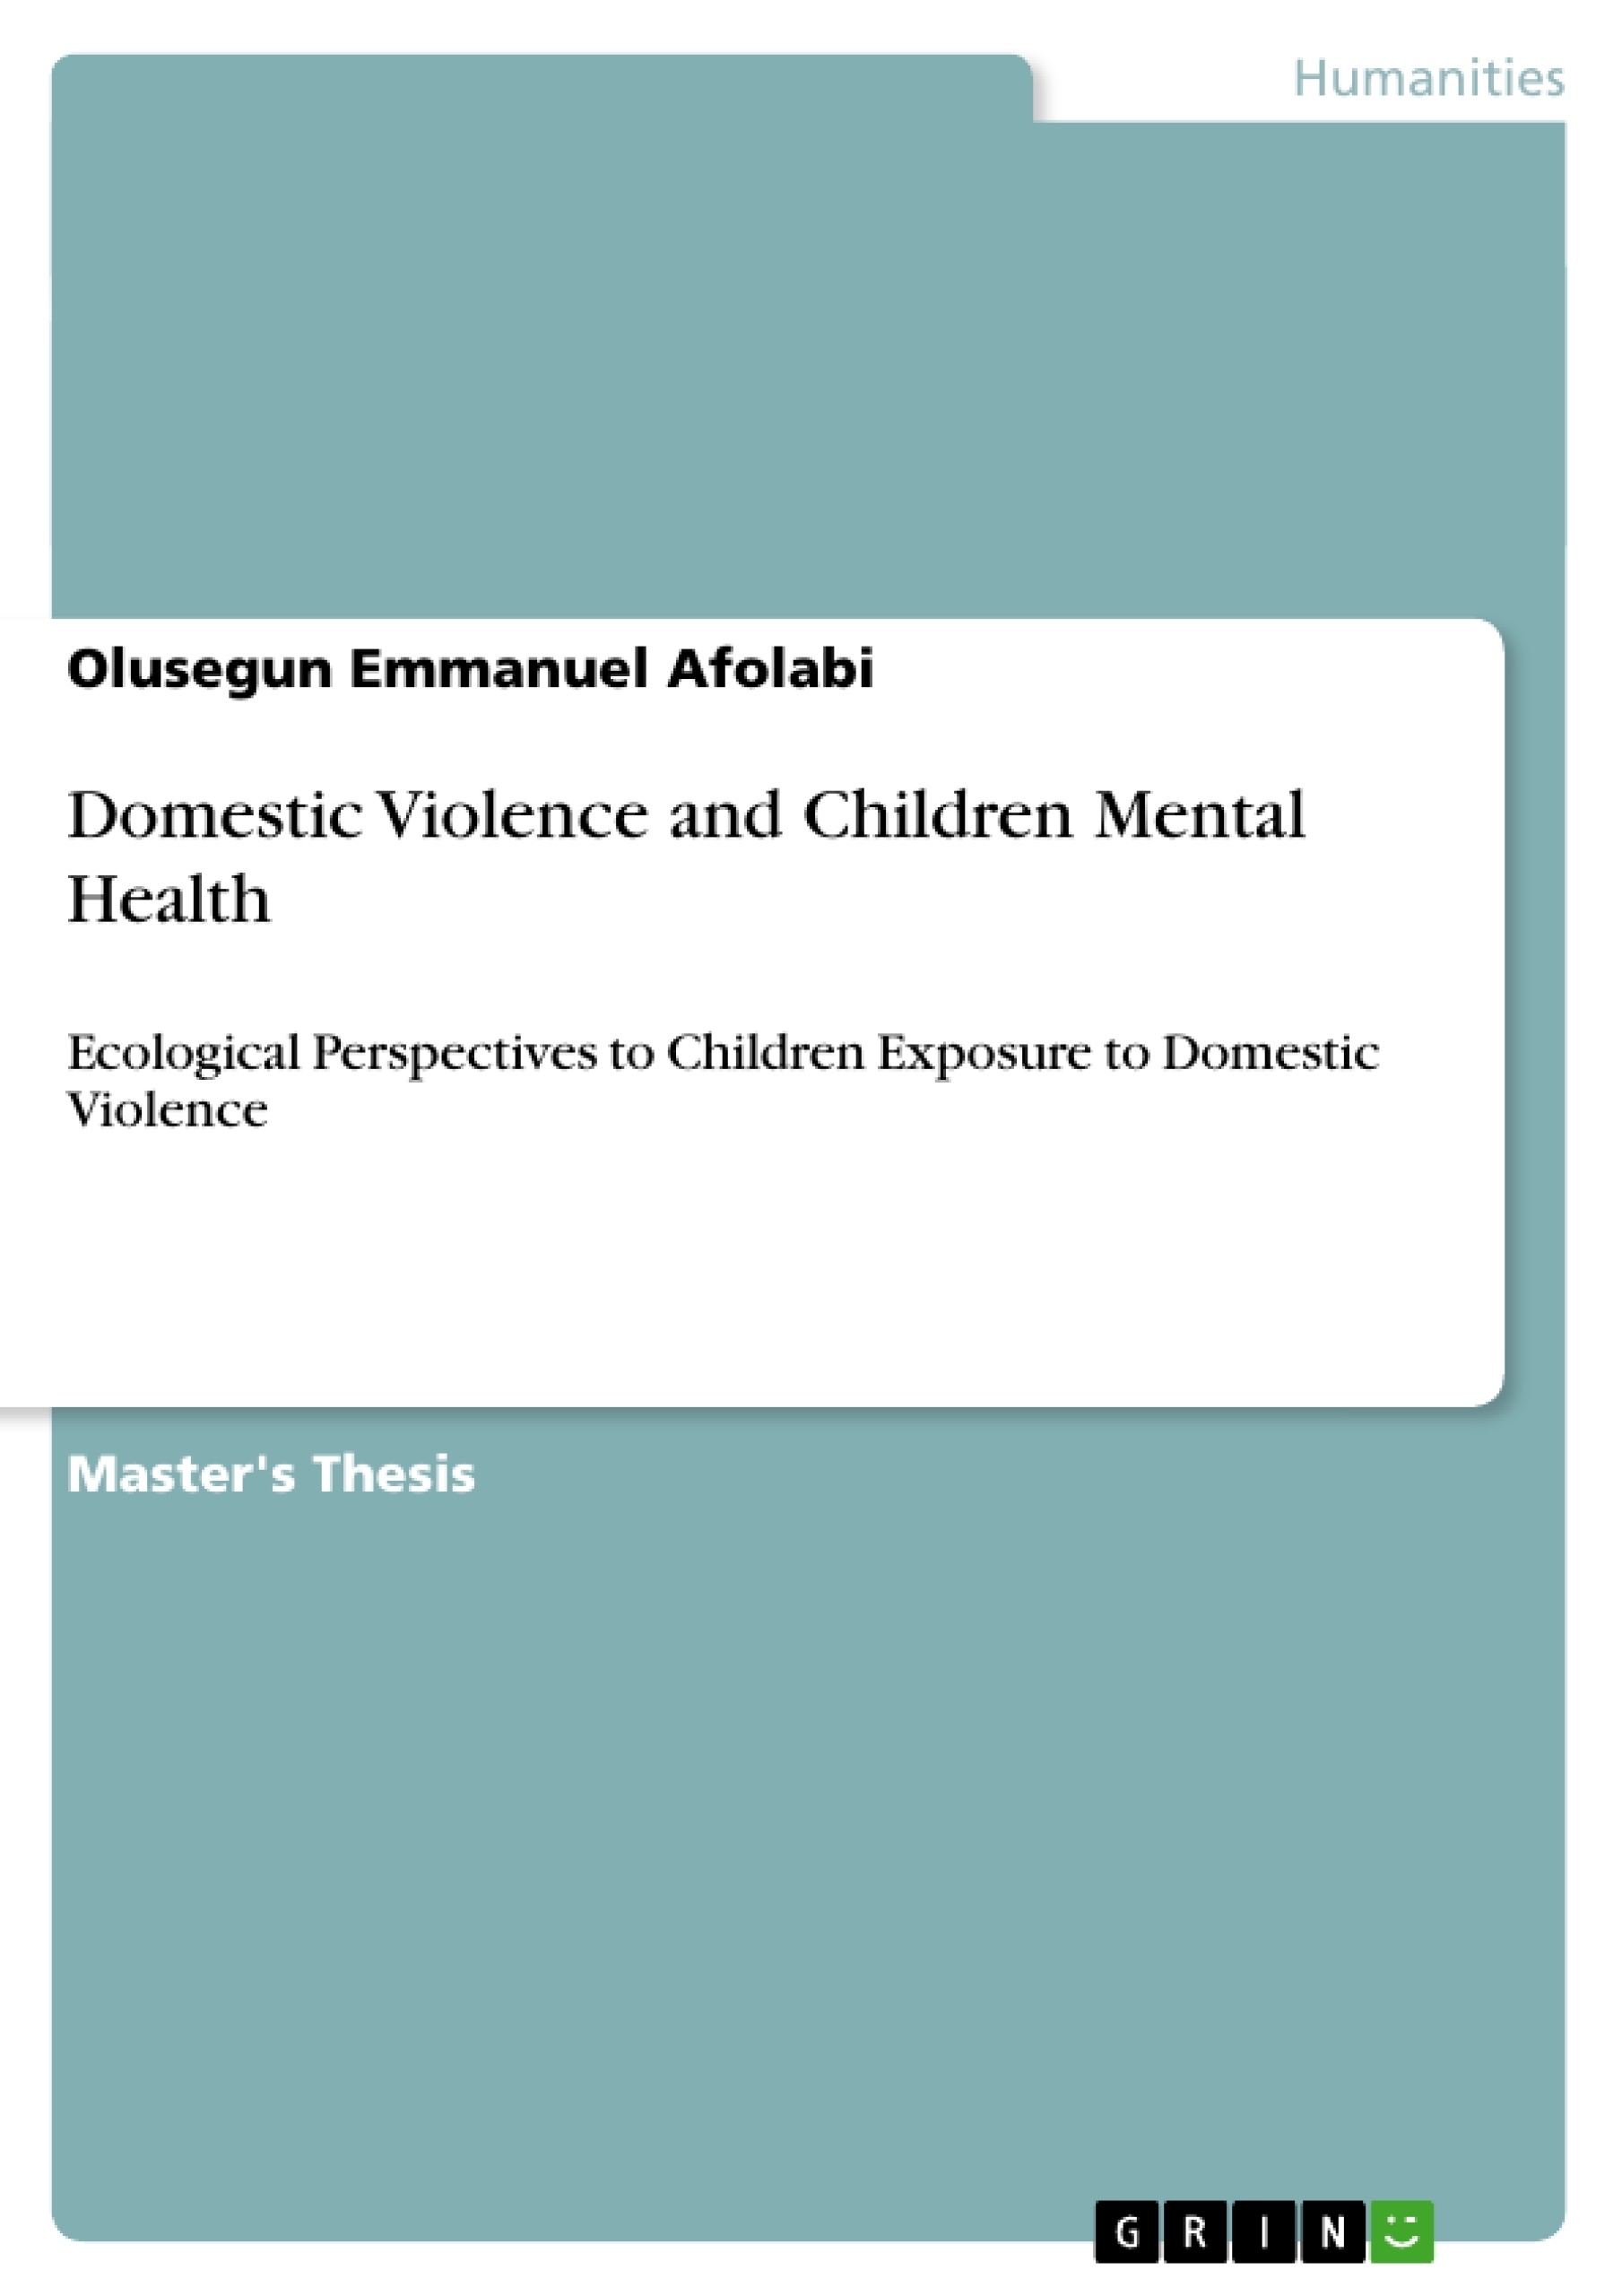 Título: Domestic Violence and Children Mental Health